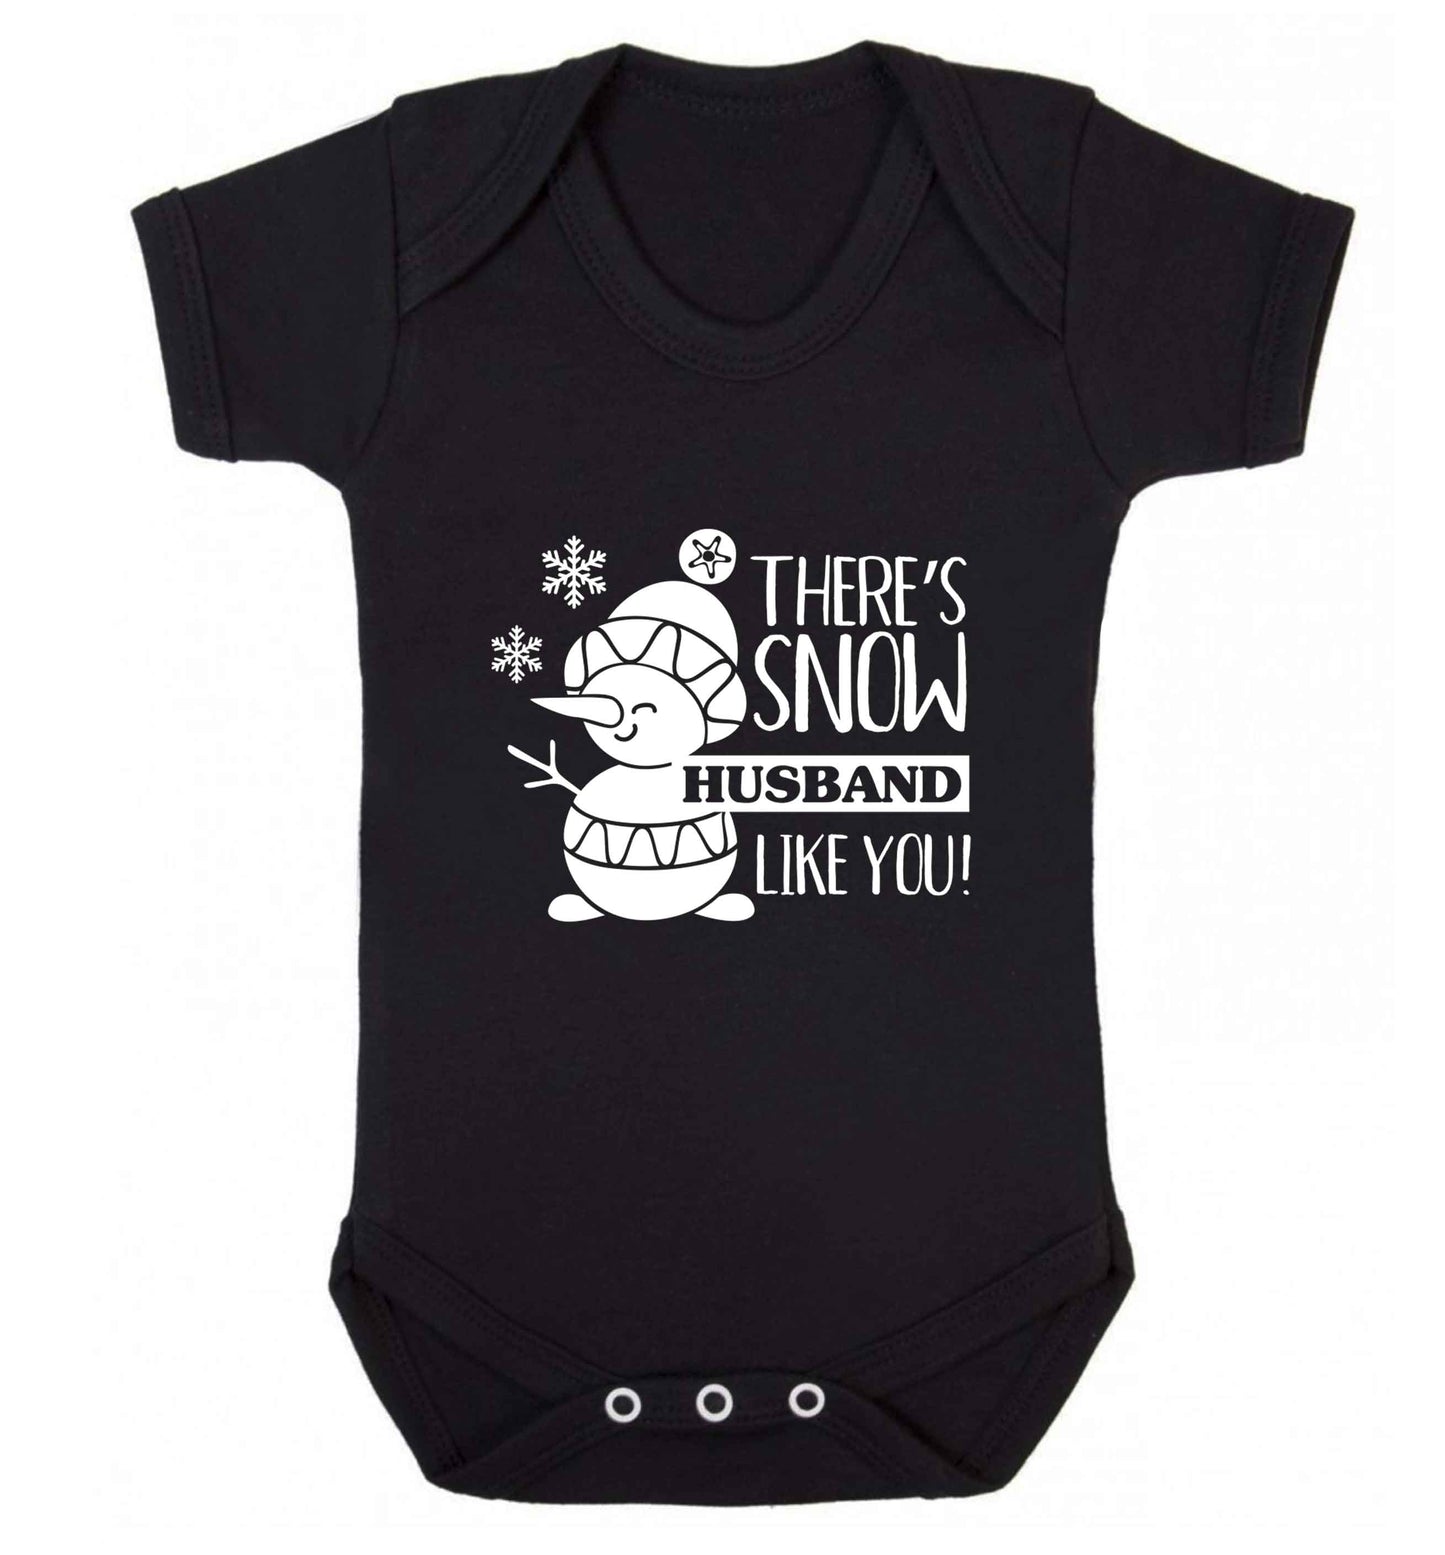 There's snow husband like you baby vest black 18-24 months